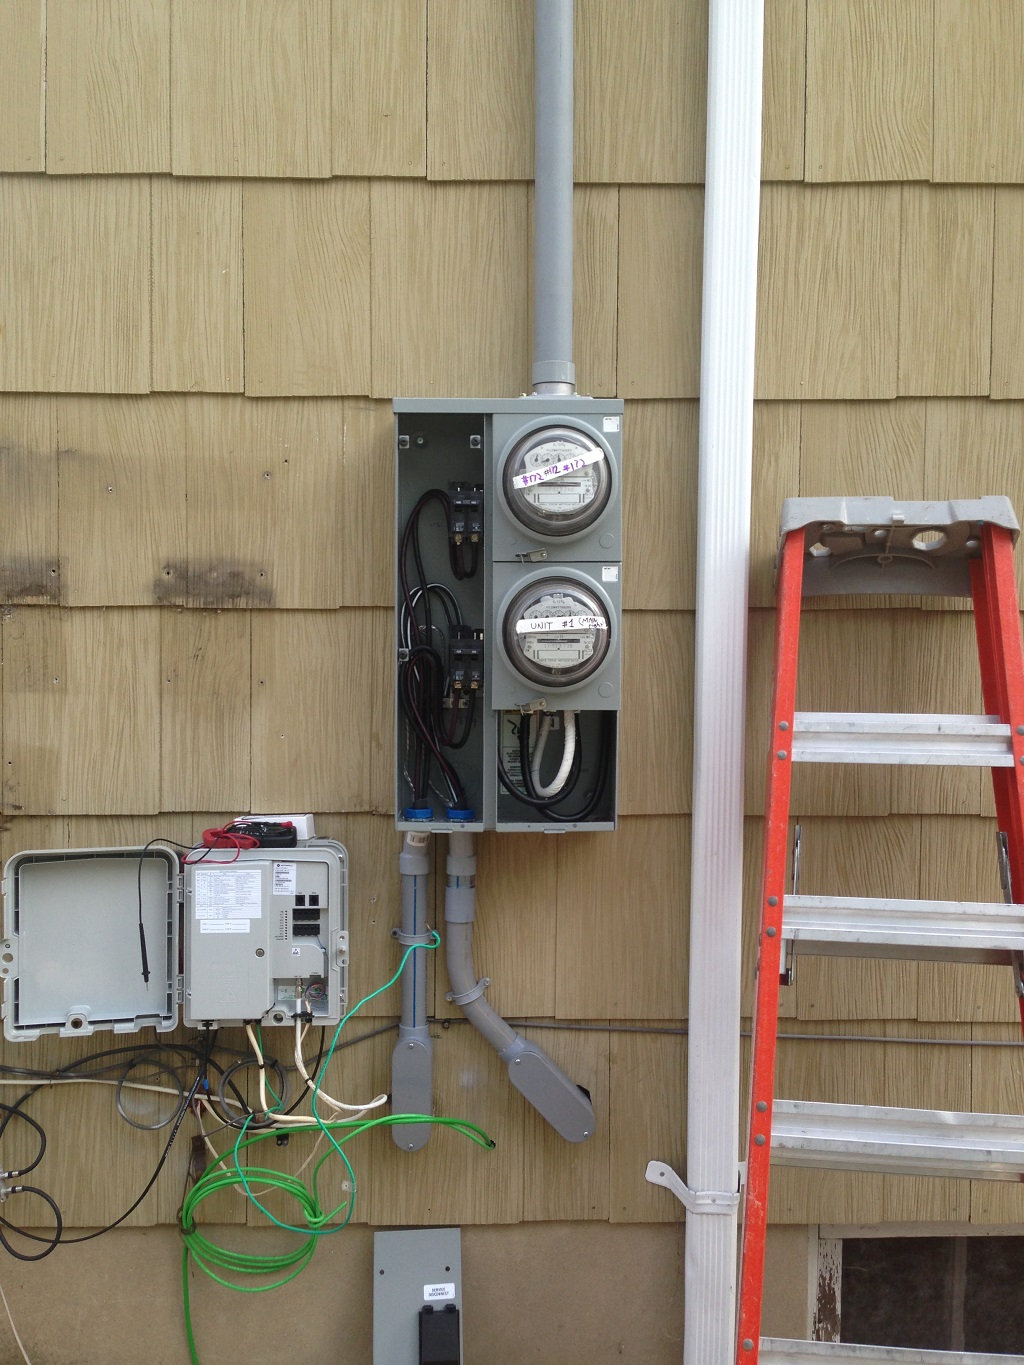 How do you upgrade an electric meter to 200-amp service?